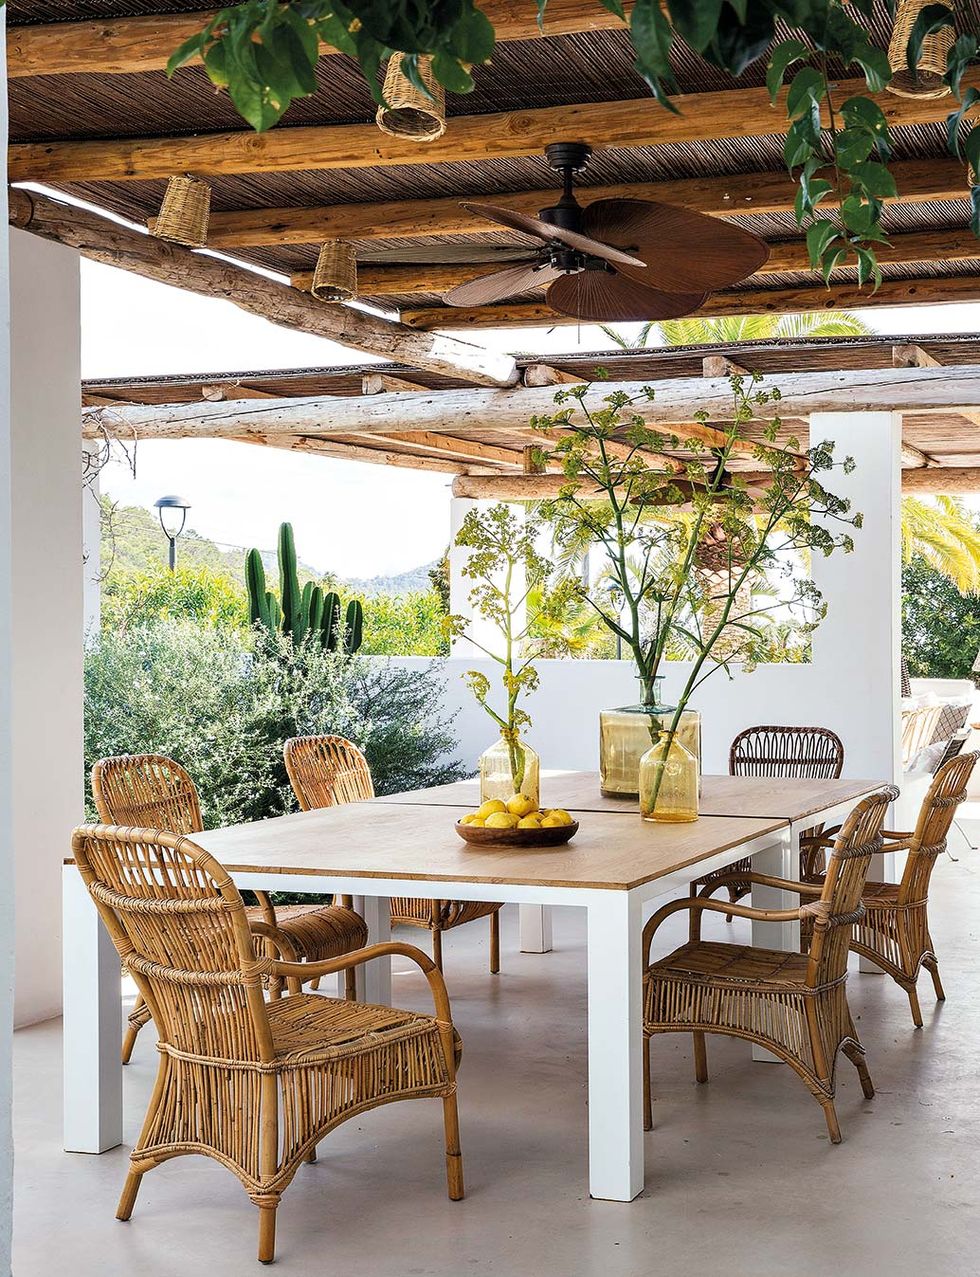 tables to eat on the porch or garden dining room with fiber armchairs